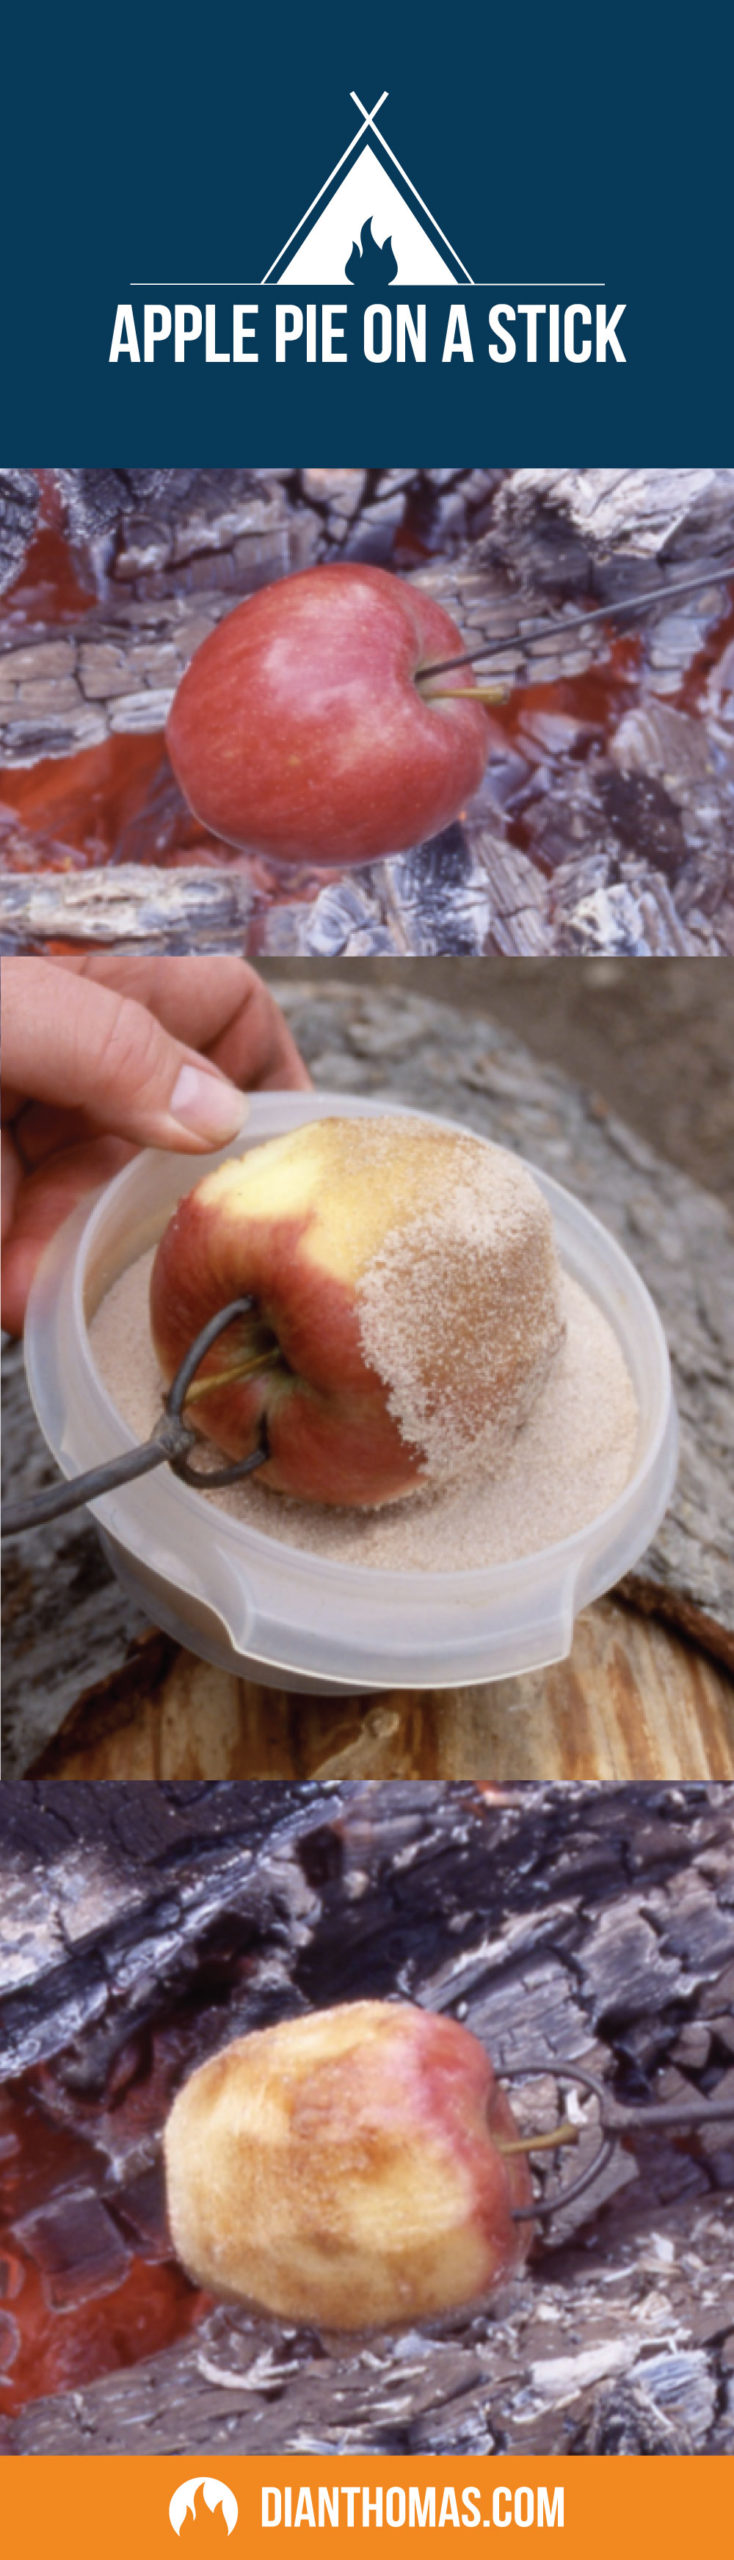 Apple pie on a stick is a delicious camp fire treat perfect for your next campout adventure.